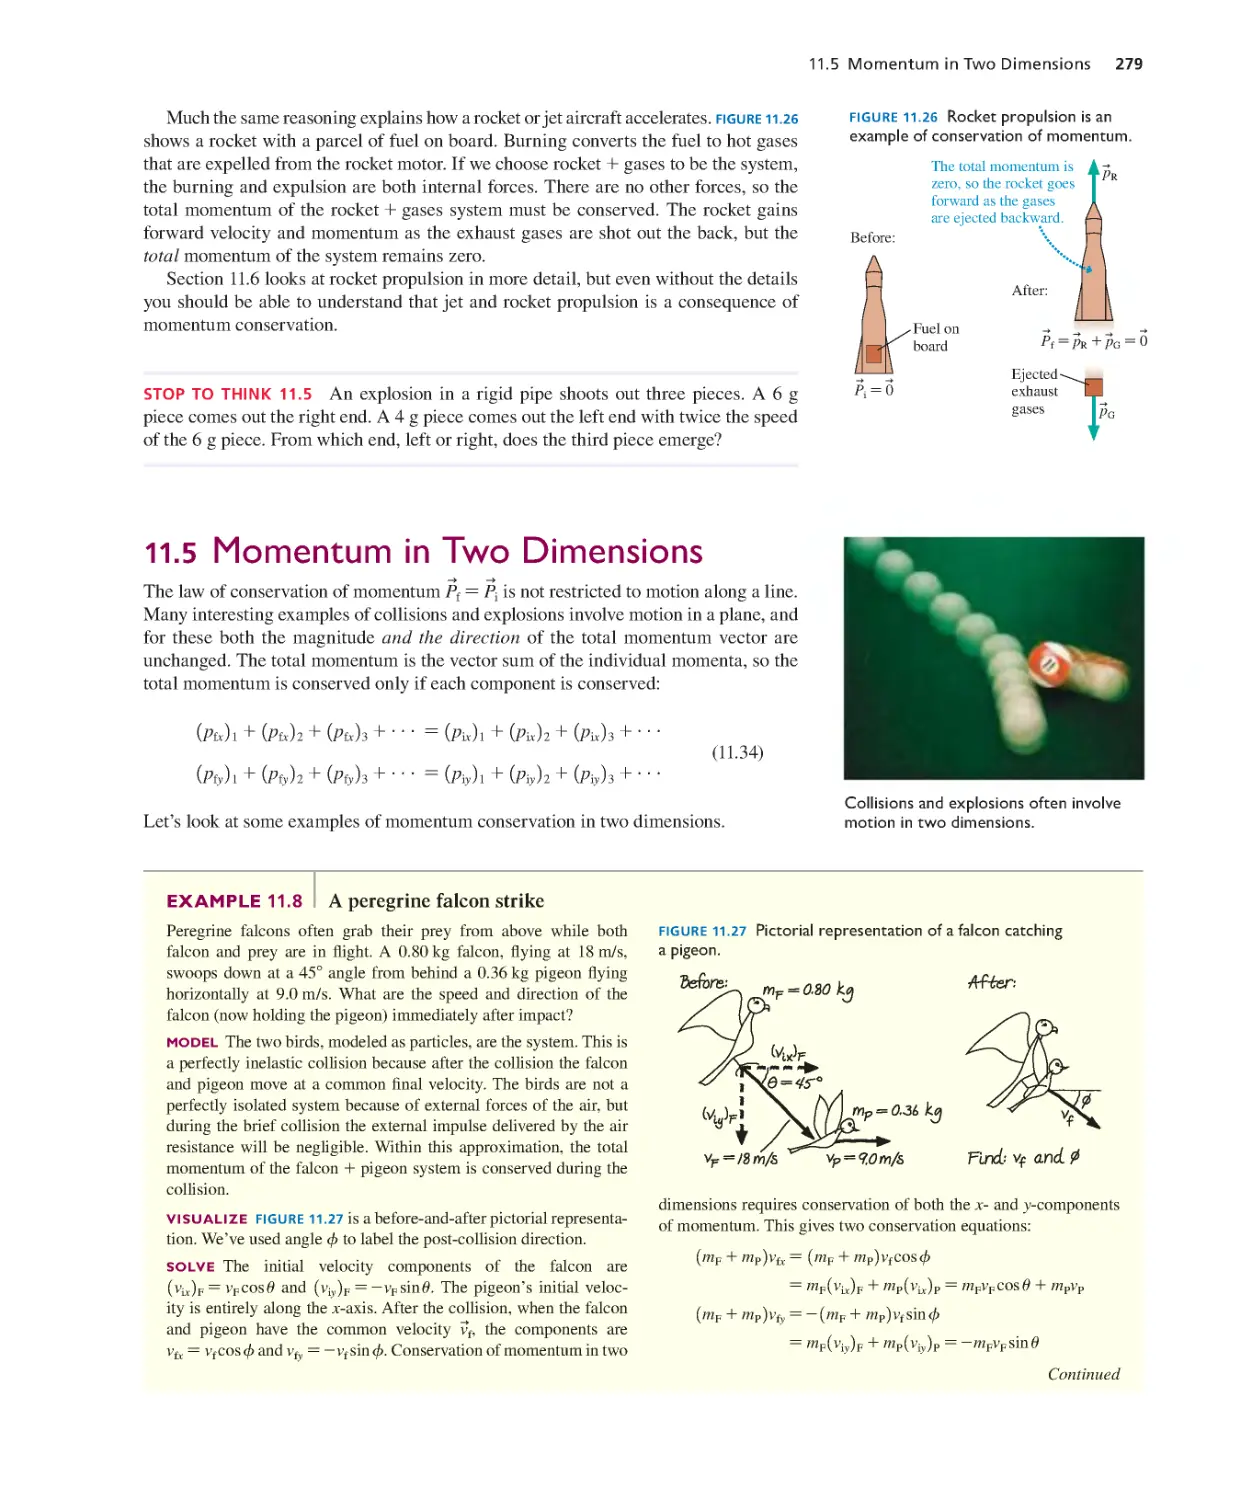 11.5. Momentum in Two Dimensions